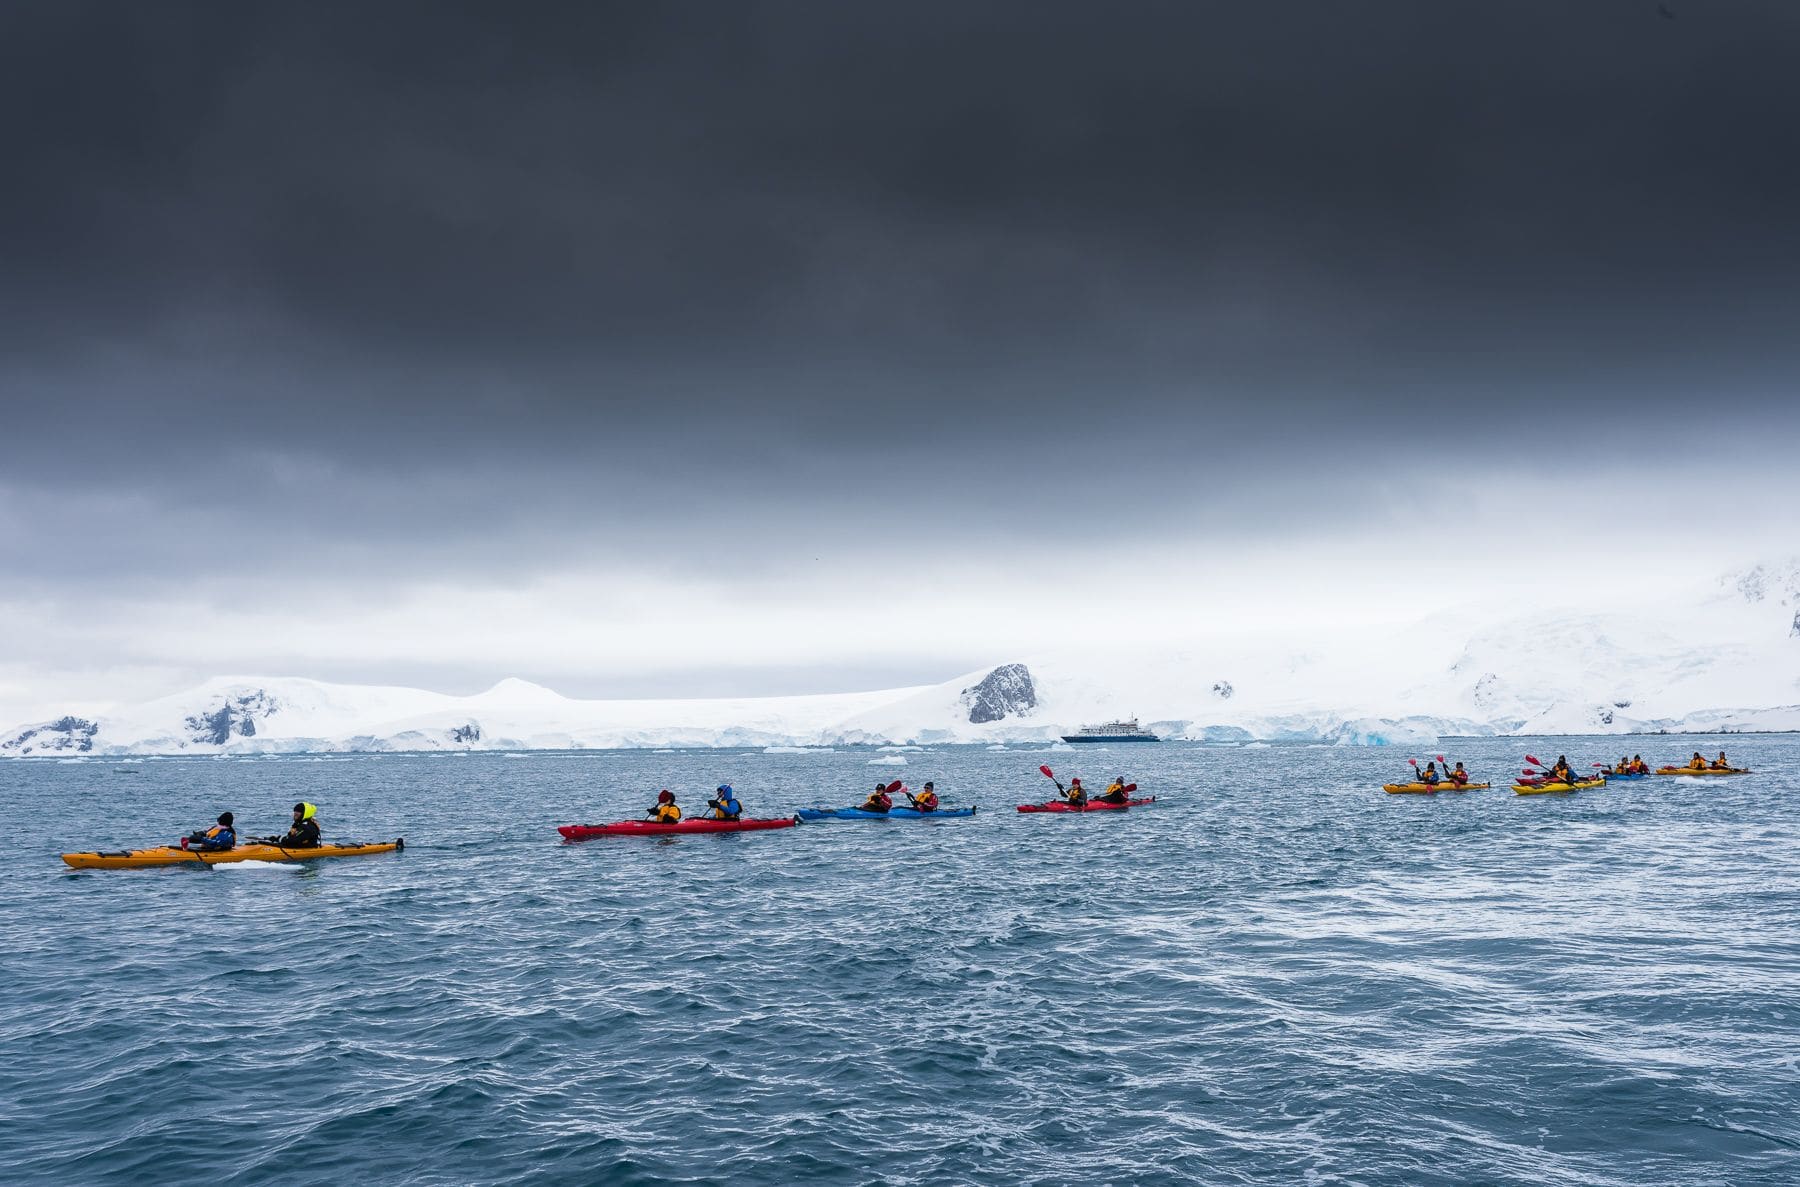 Kayakers on the icy Arctic water